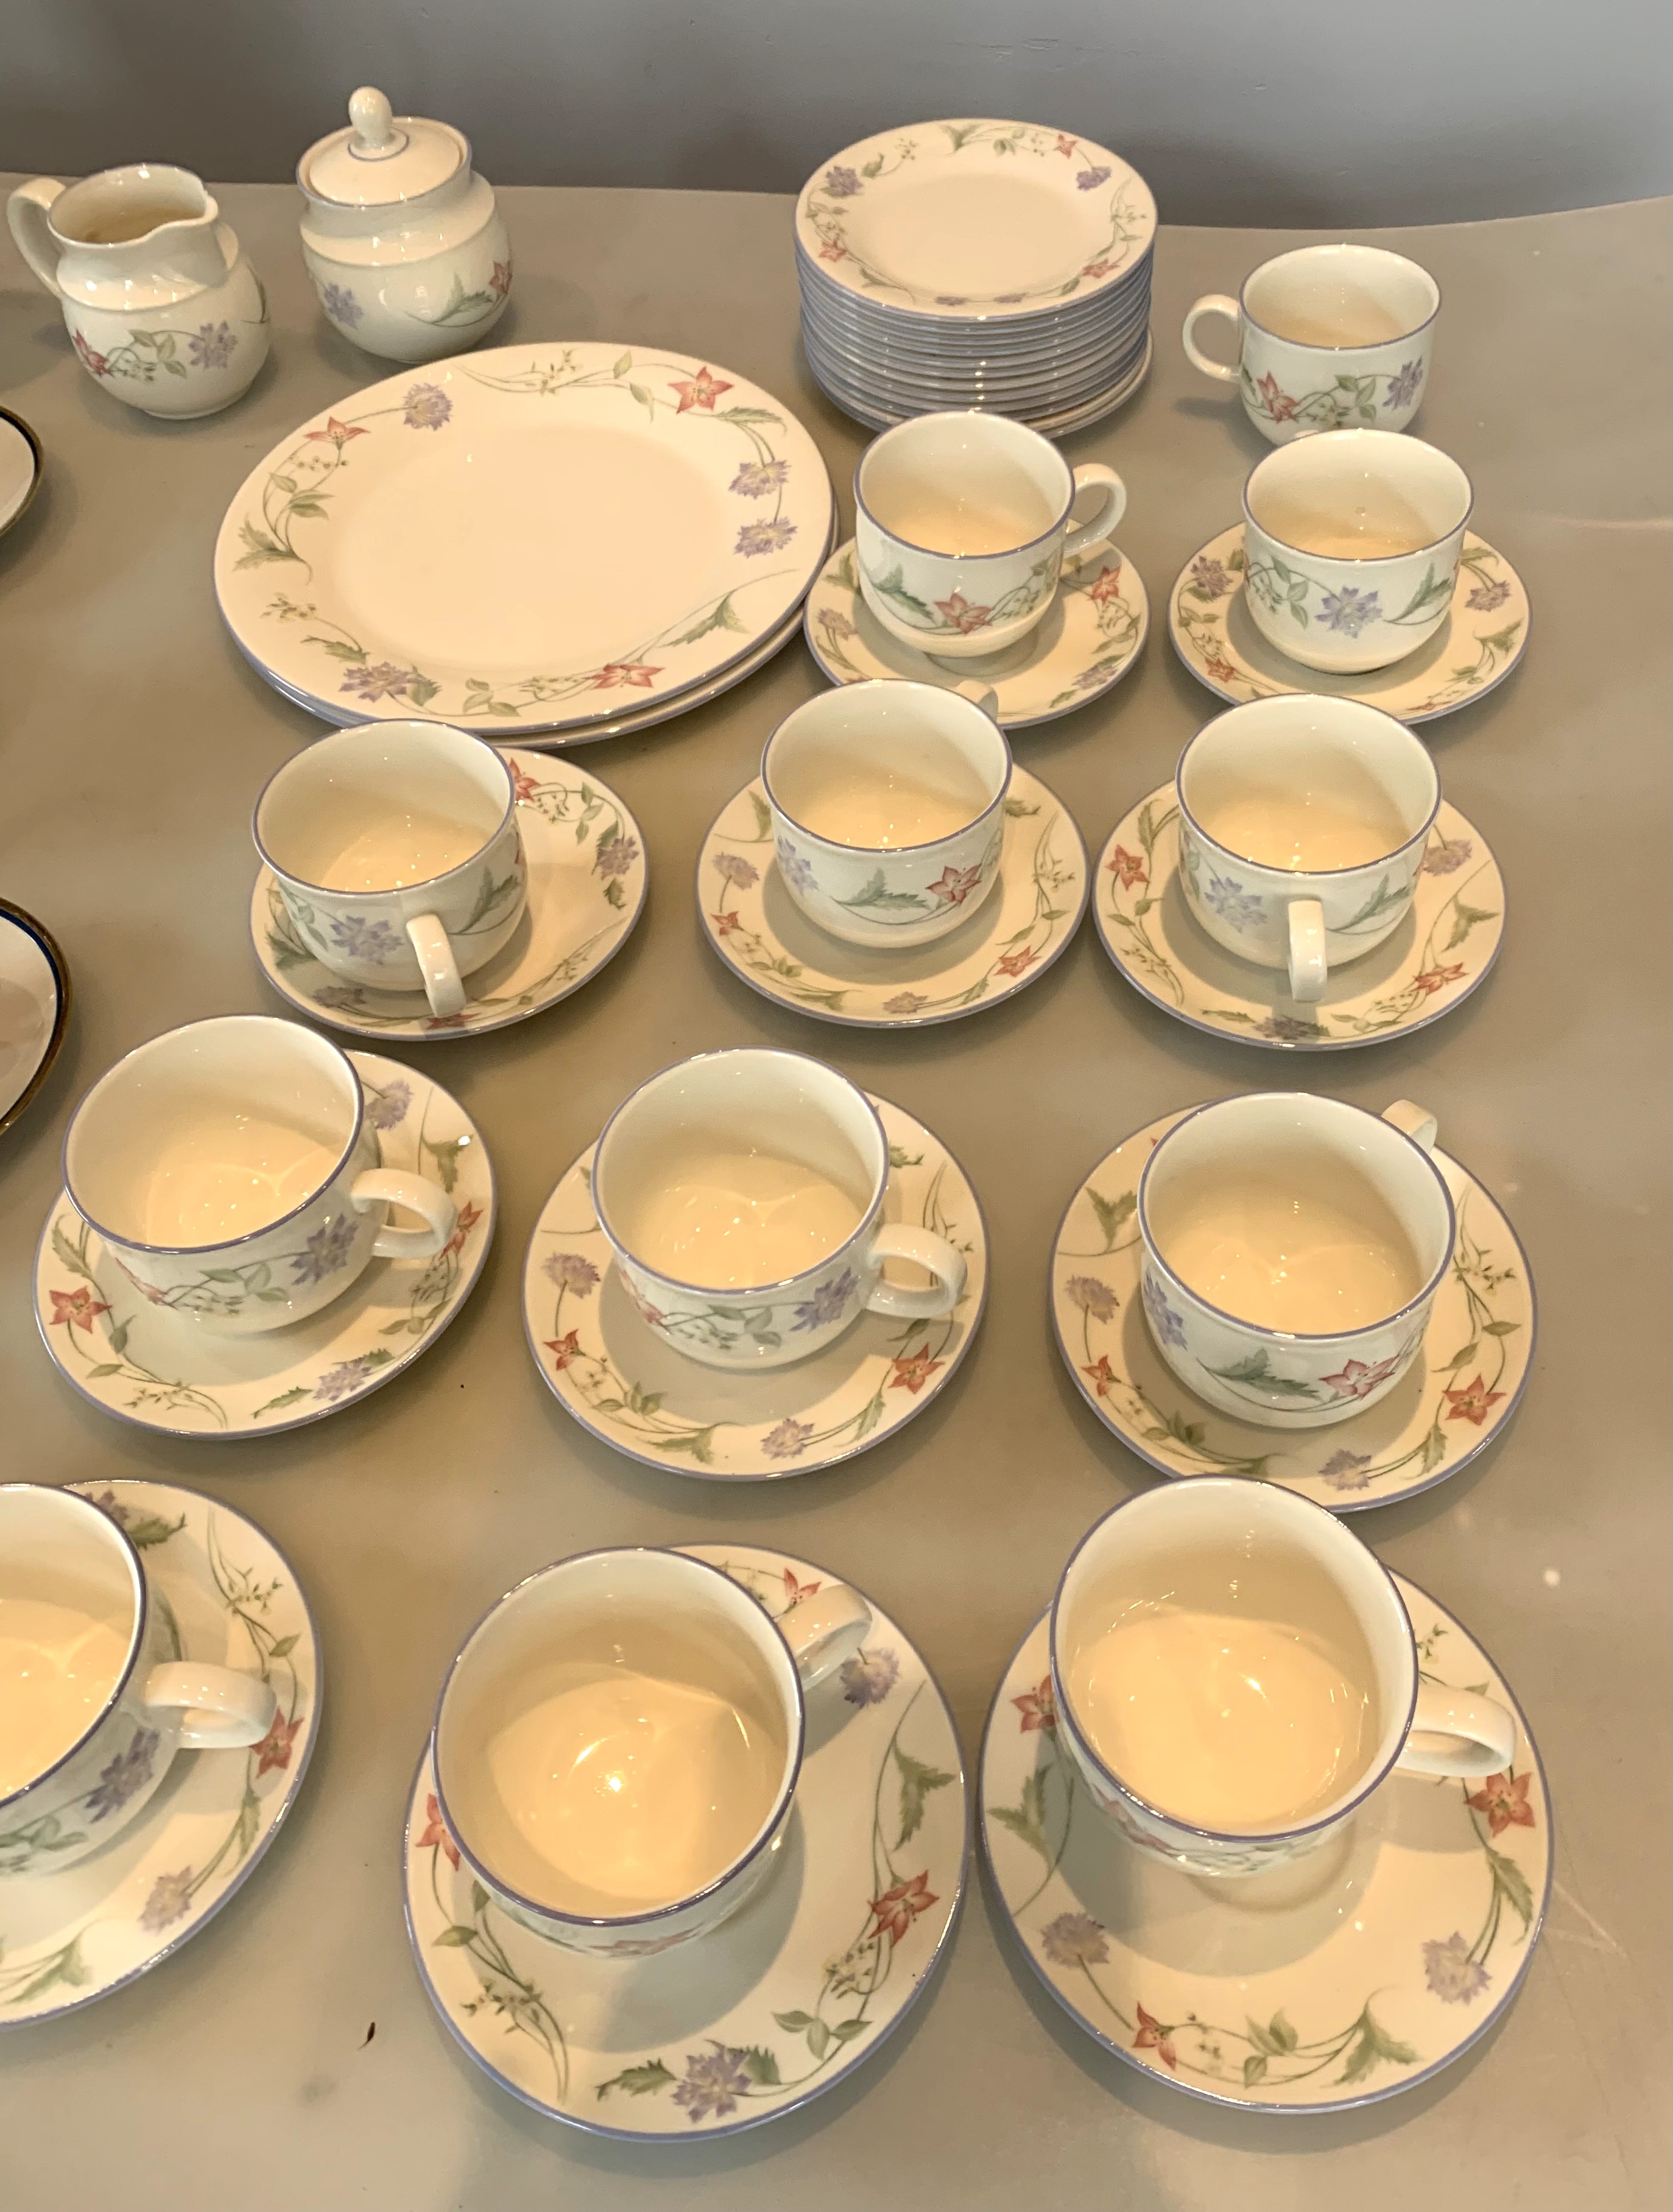 3 tea, coffee and dinner sets - Image 10 of 14